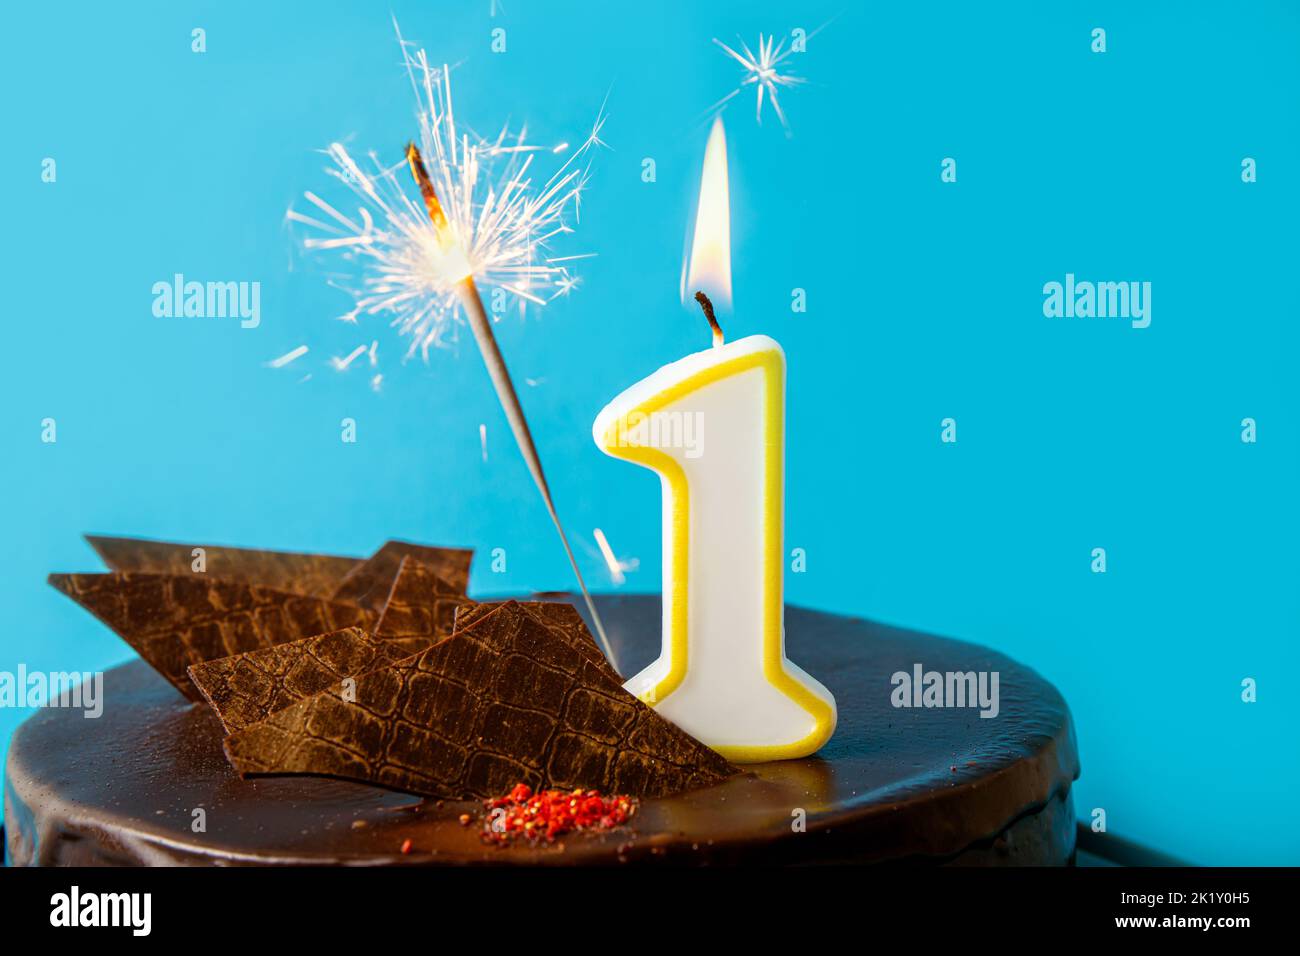 Number 1 birthday candle burning and sparkler with sparks fly on cake. The first birthday of anniversary celebration concept. Lot of copy space. Stock Photo